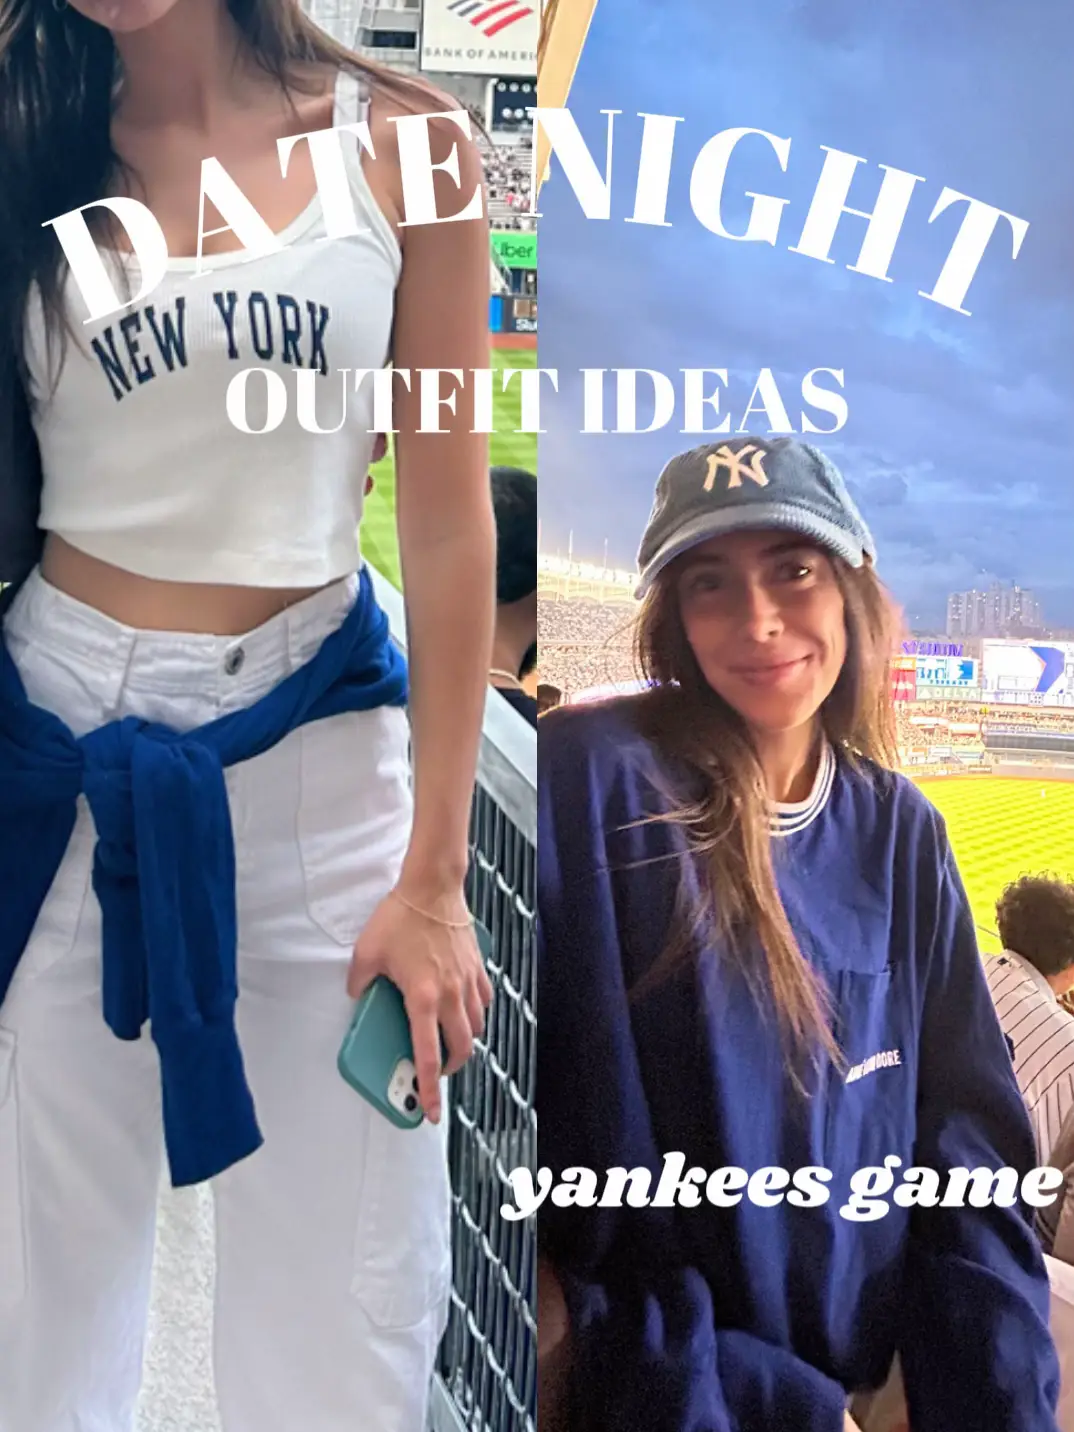 DATE NIGHT OUTFITS - Yankees Game, Gallery posted by Emma